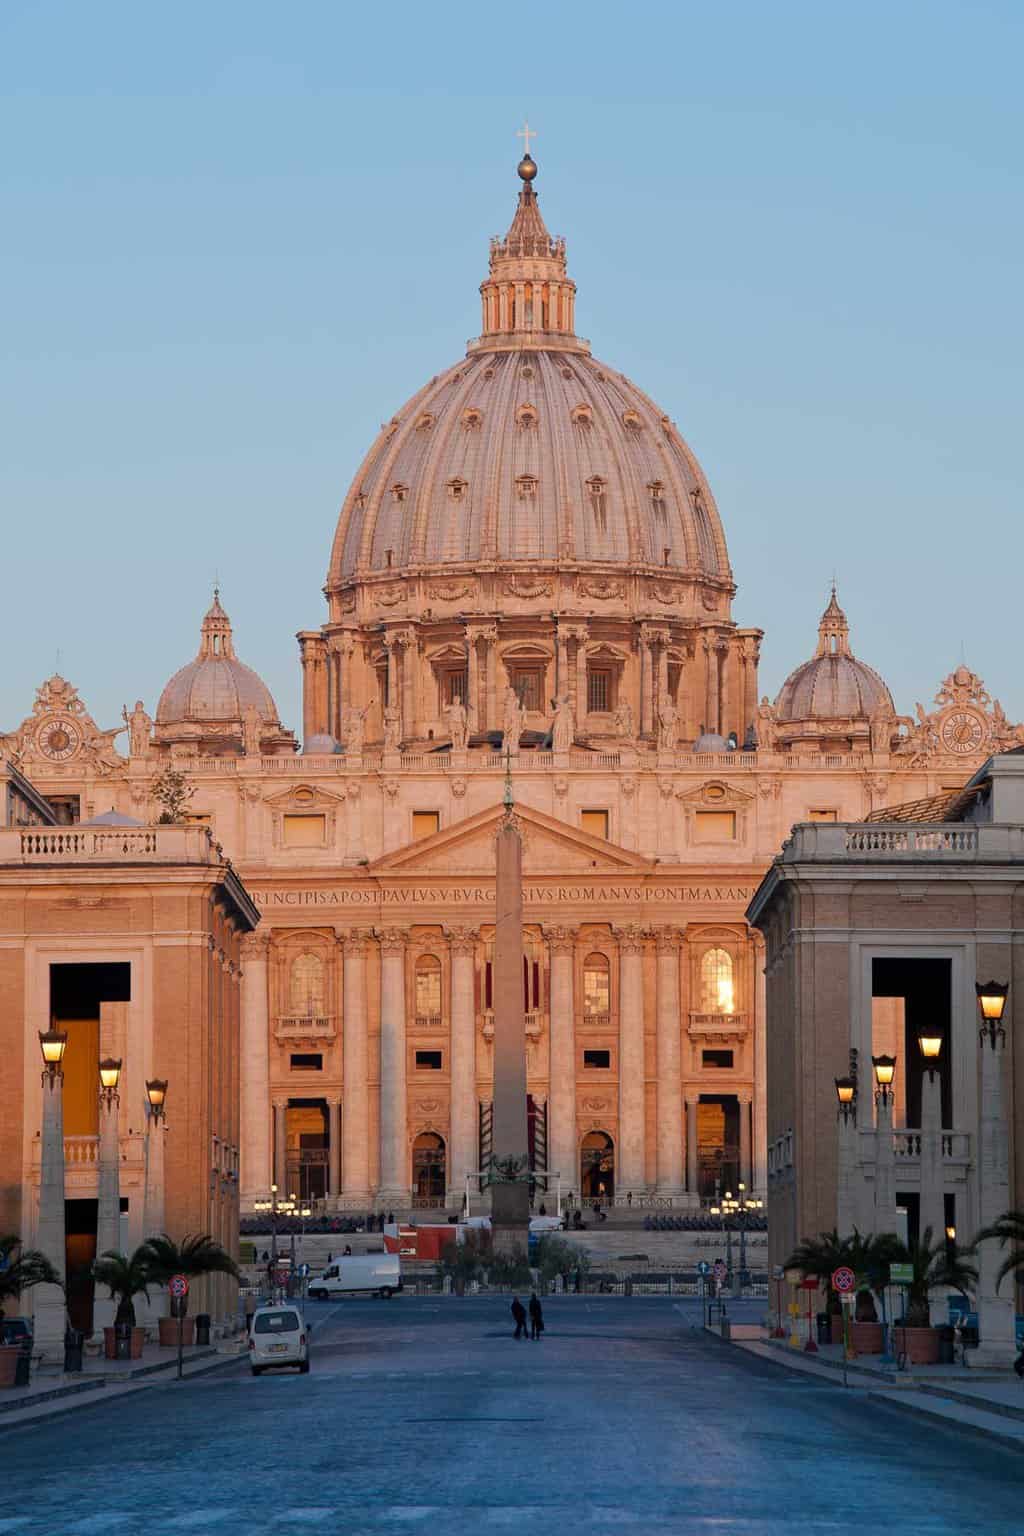 The exterior of St Peter's Basilica bathed in a light pink glow at sunrise.